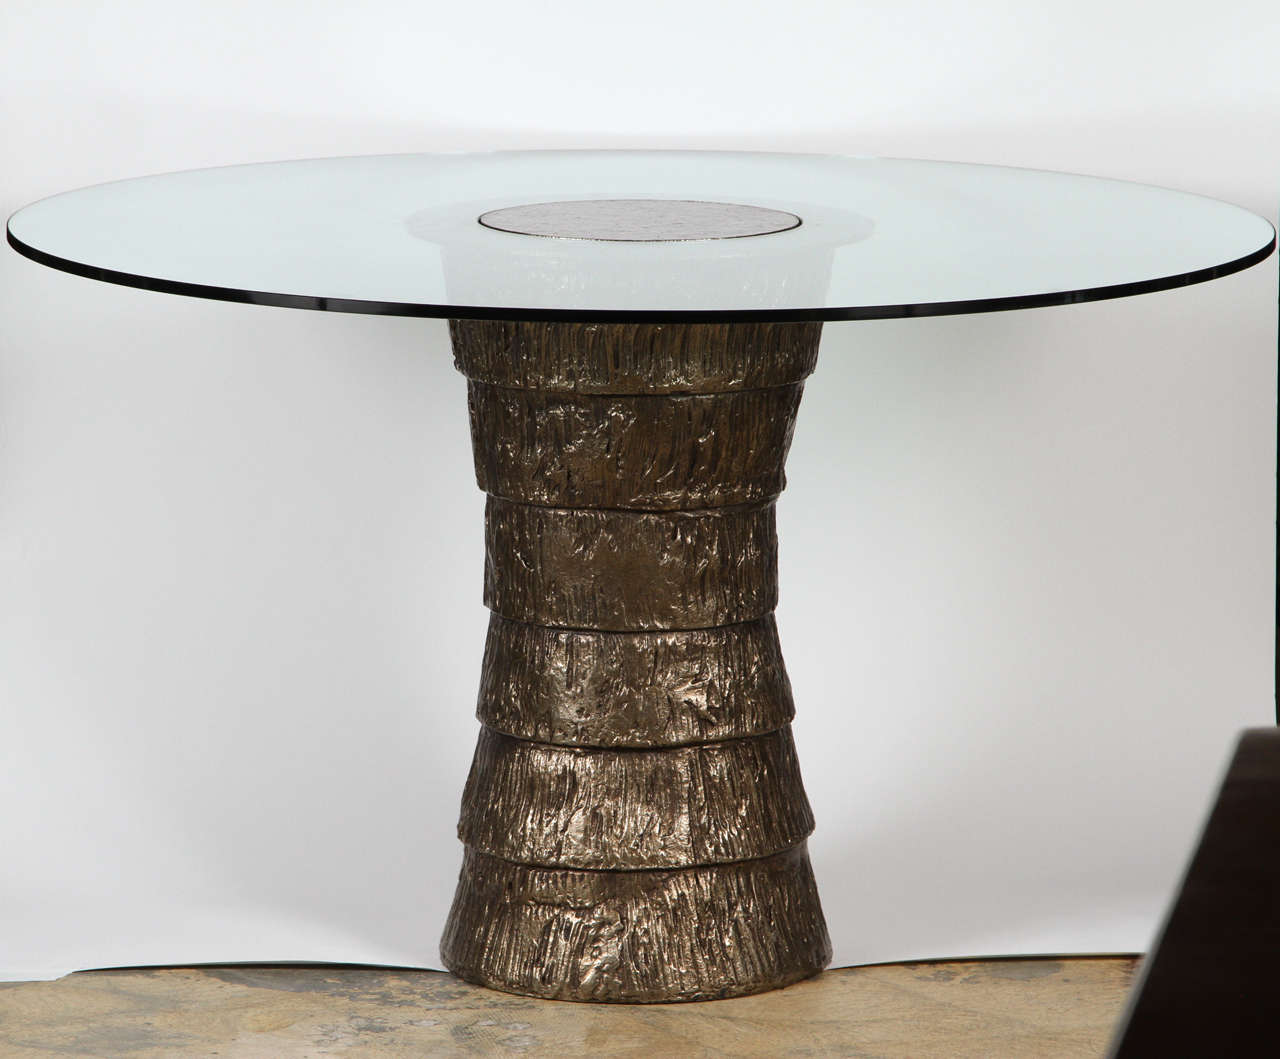 A contemporary, Brutalist, organic modern sculptural steel pedestal style small dining or center table with glass top. Gold textured bronze finish. By order.